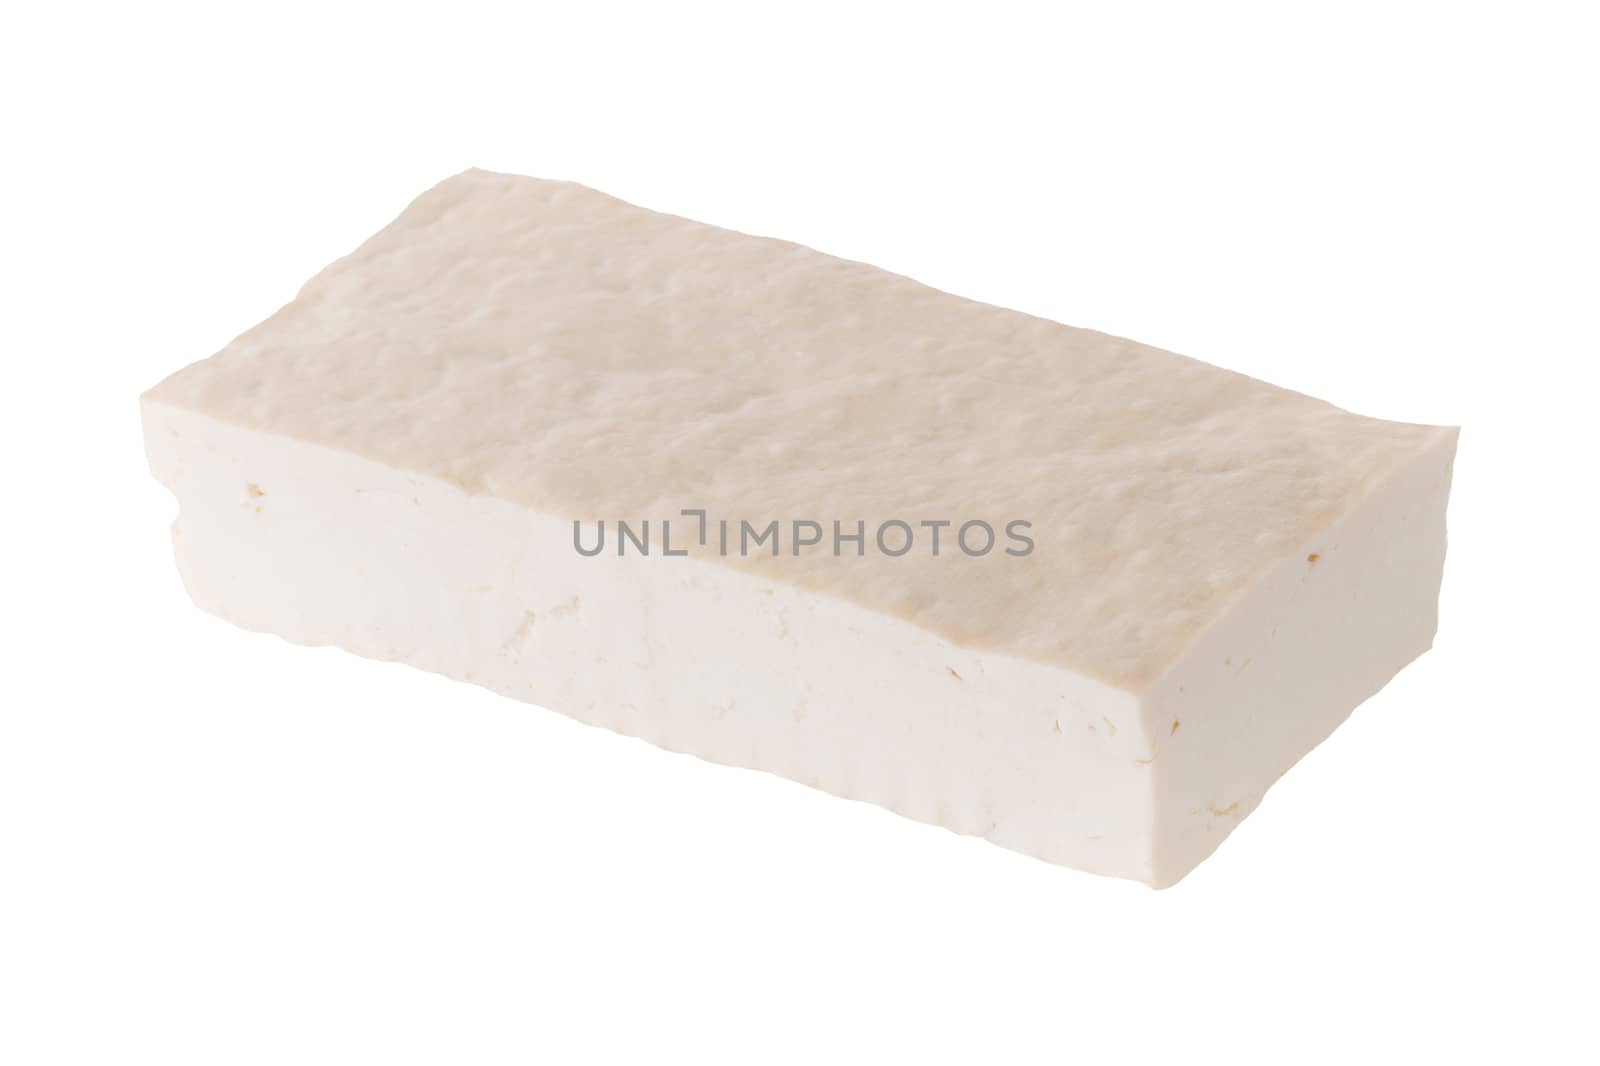 soy cheese tofu diced isolated on white background by kaiskynet